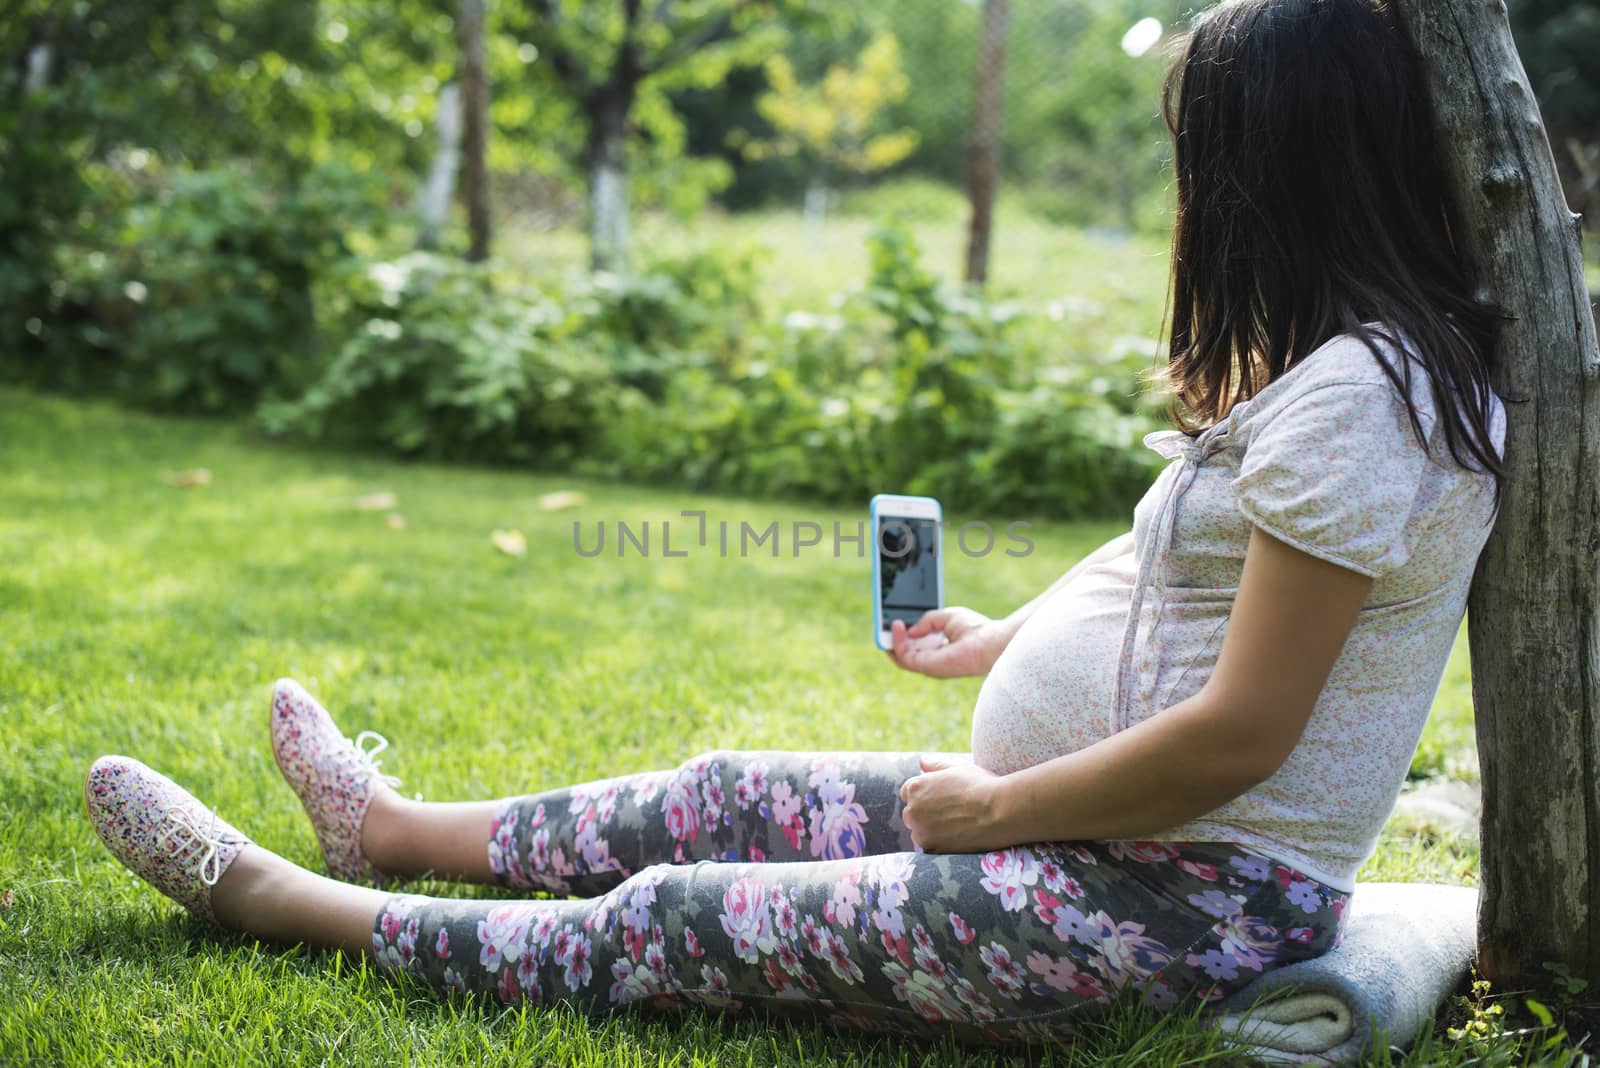 Pregnant women with smartphone in a garden